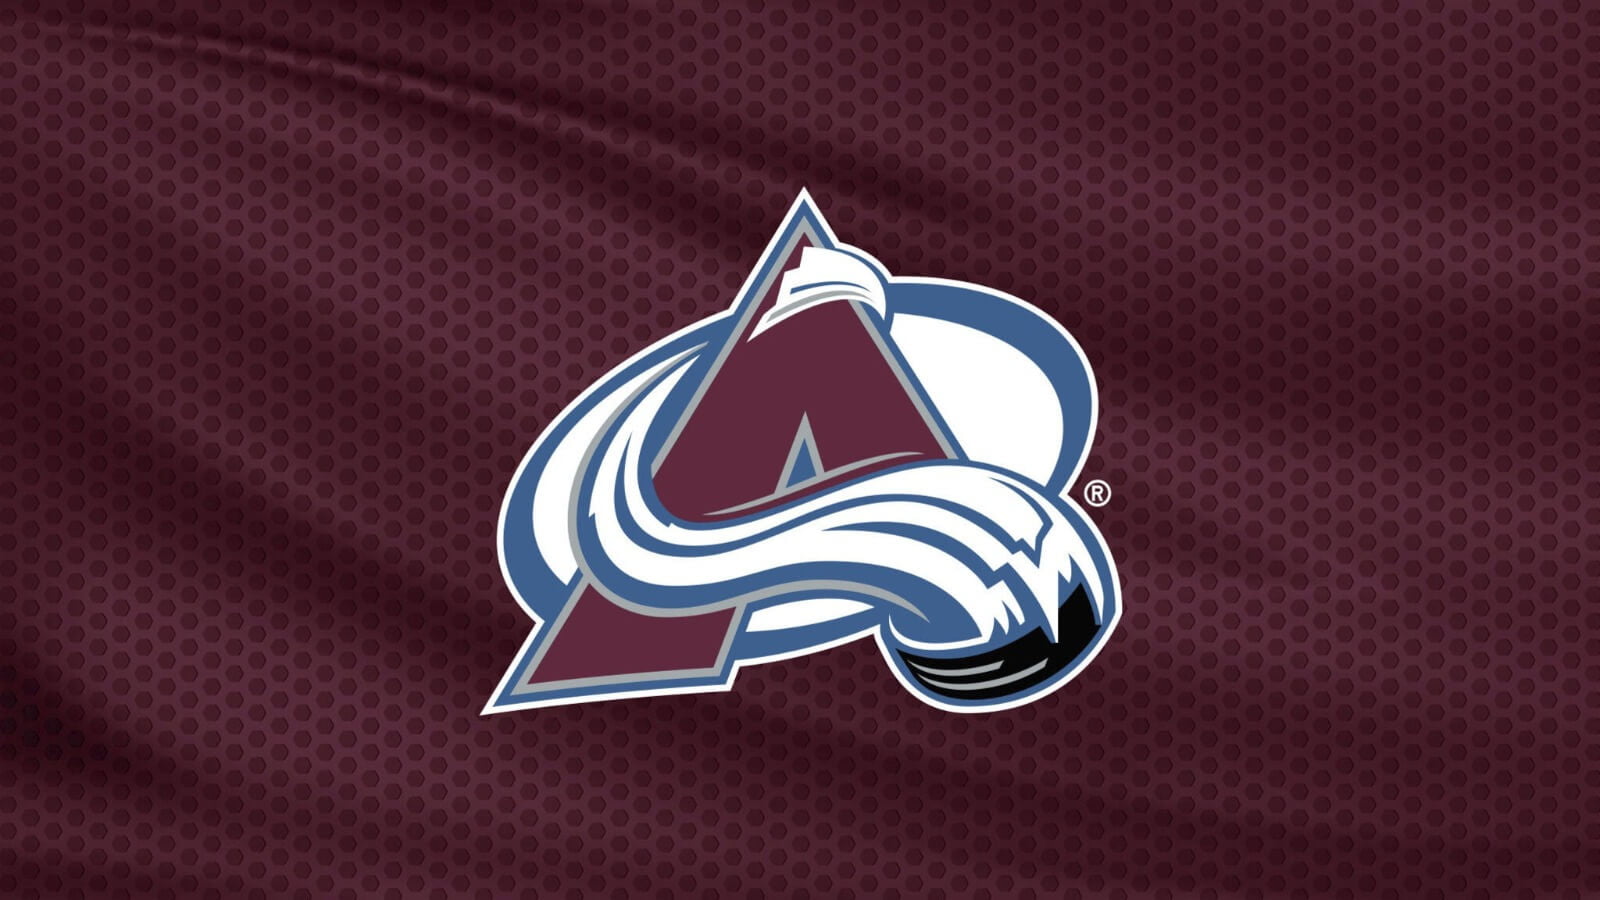 How To Watch The Colorado Avalanche Live This Season